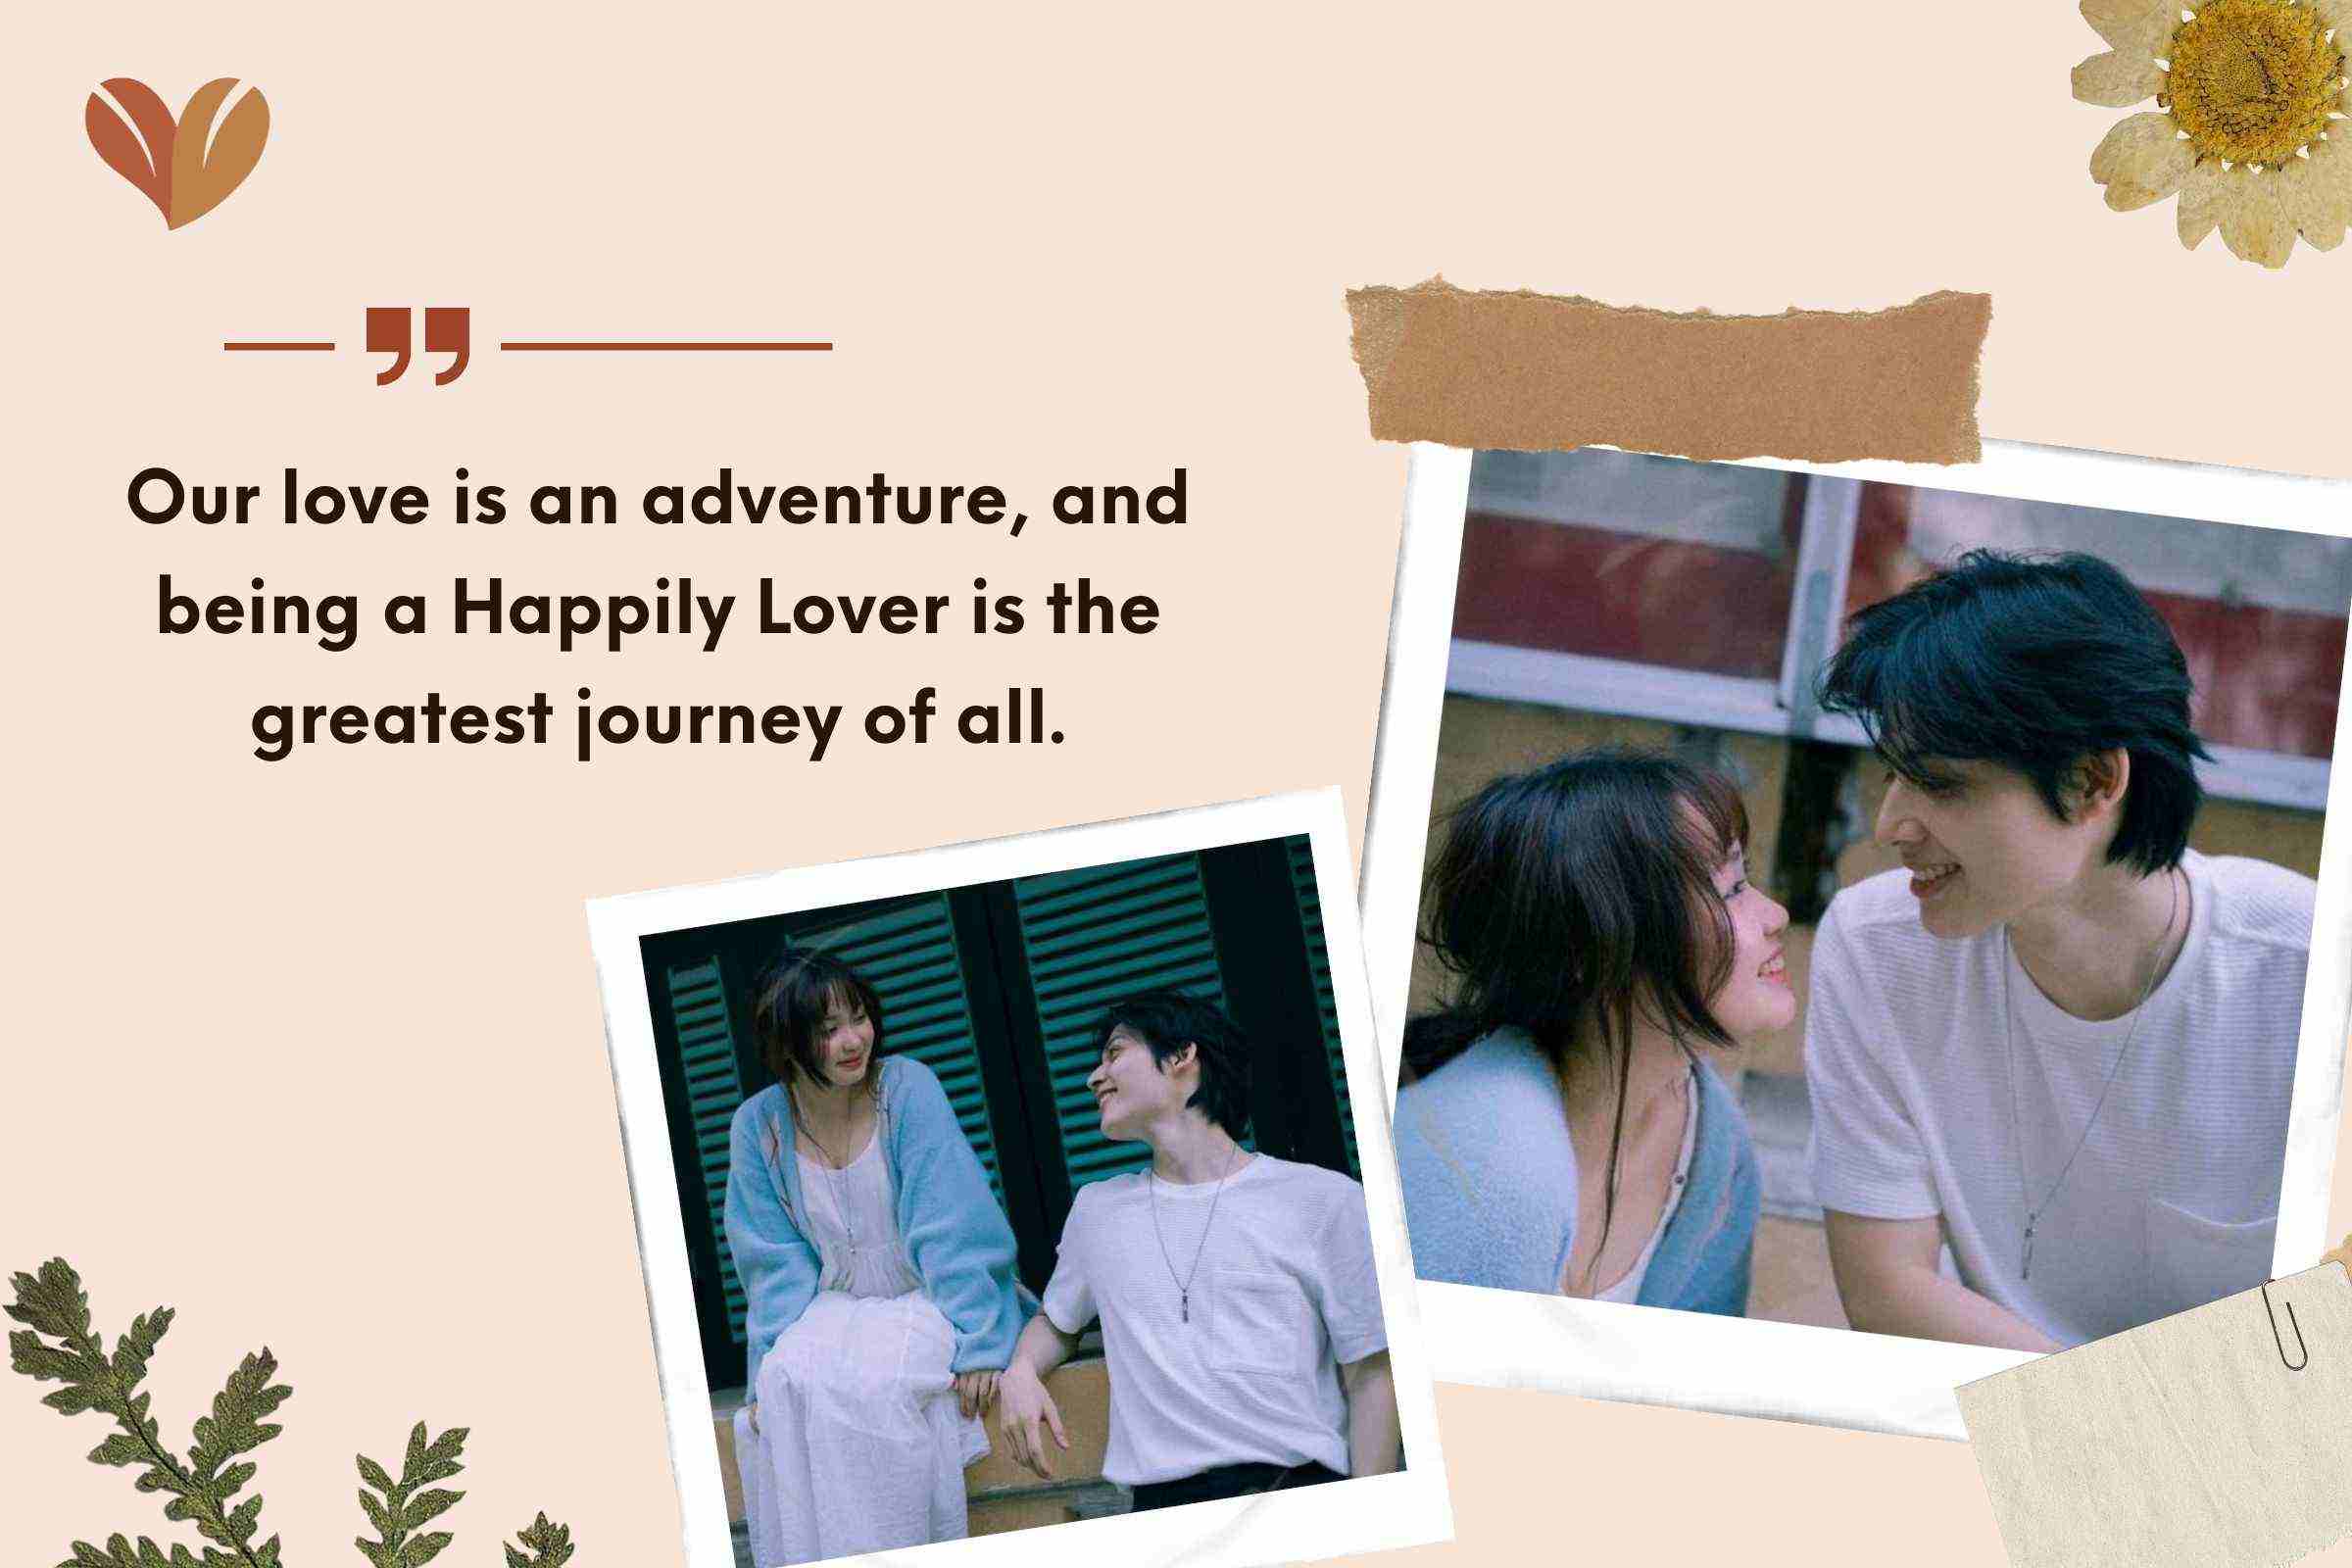 Our love is an adventure, and being a Happily Lover is the greatest journey of all.